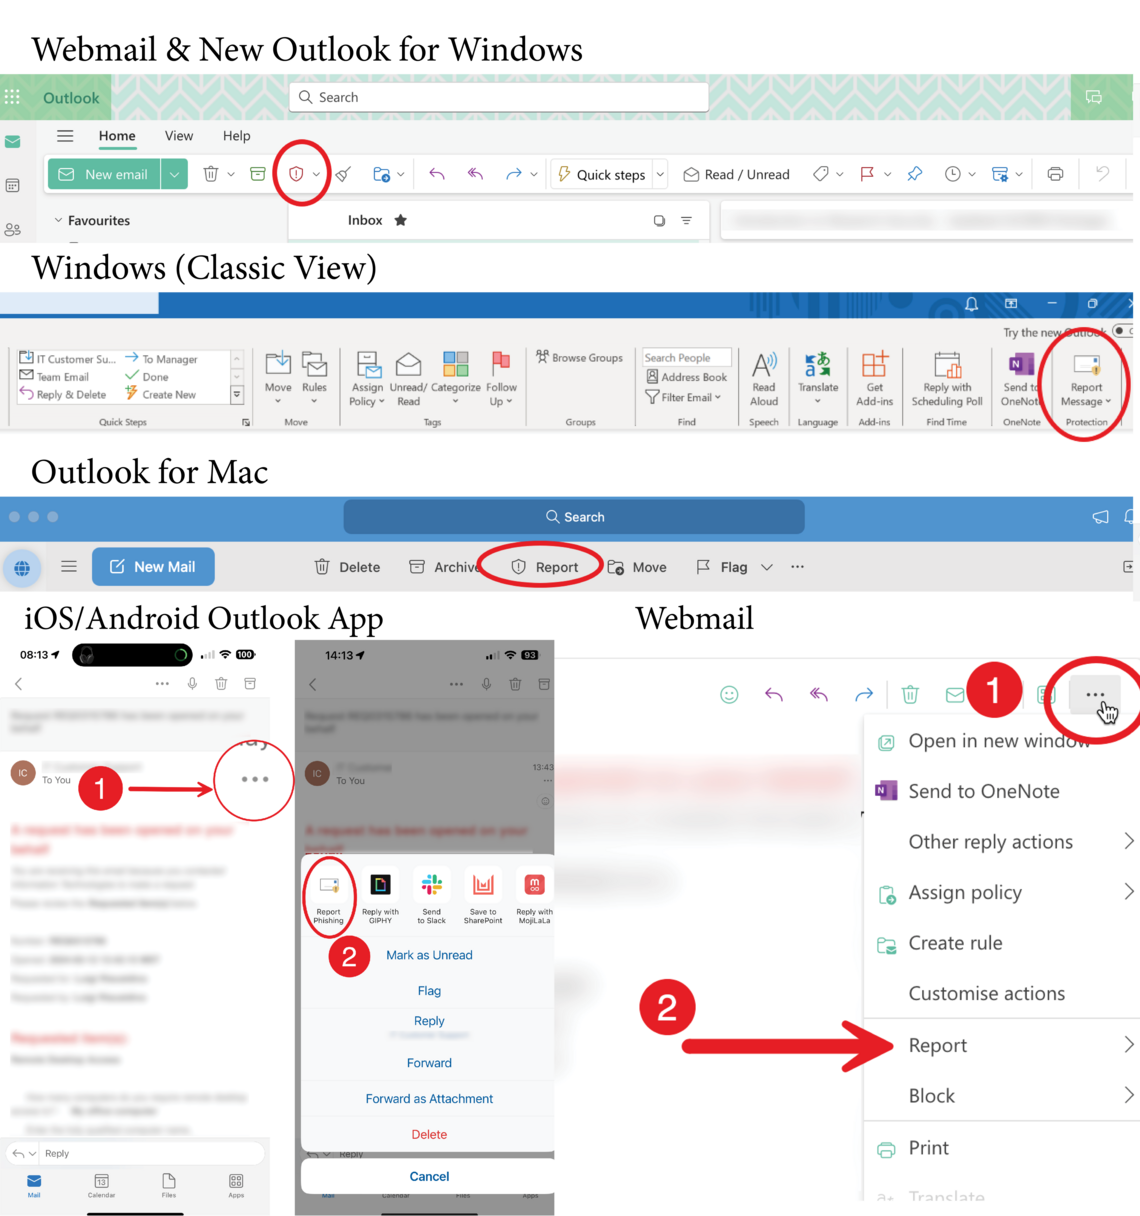 Examples of the Report button in Outlook